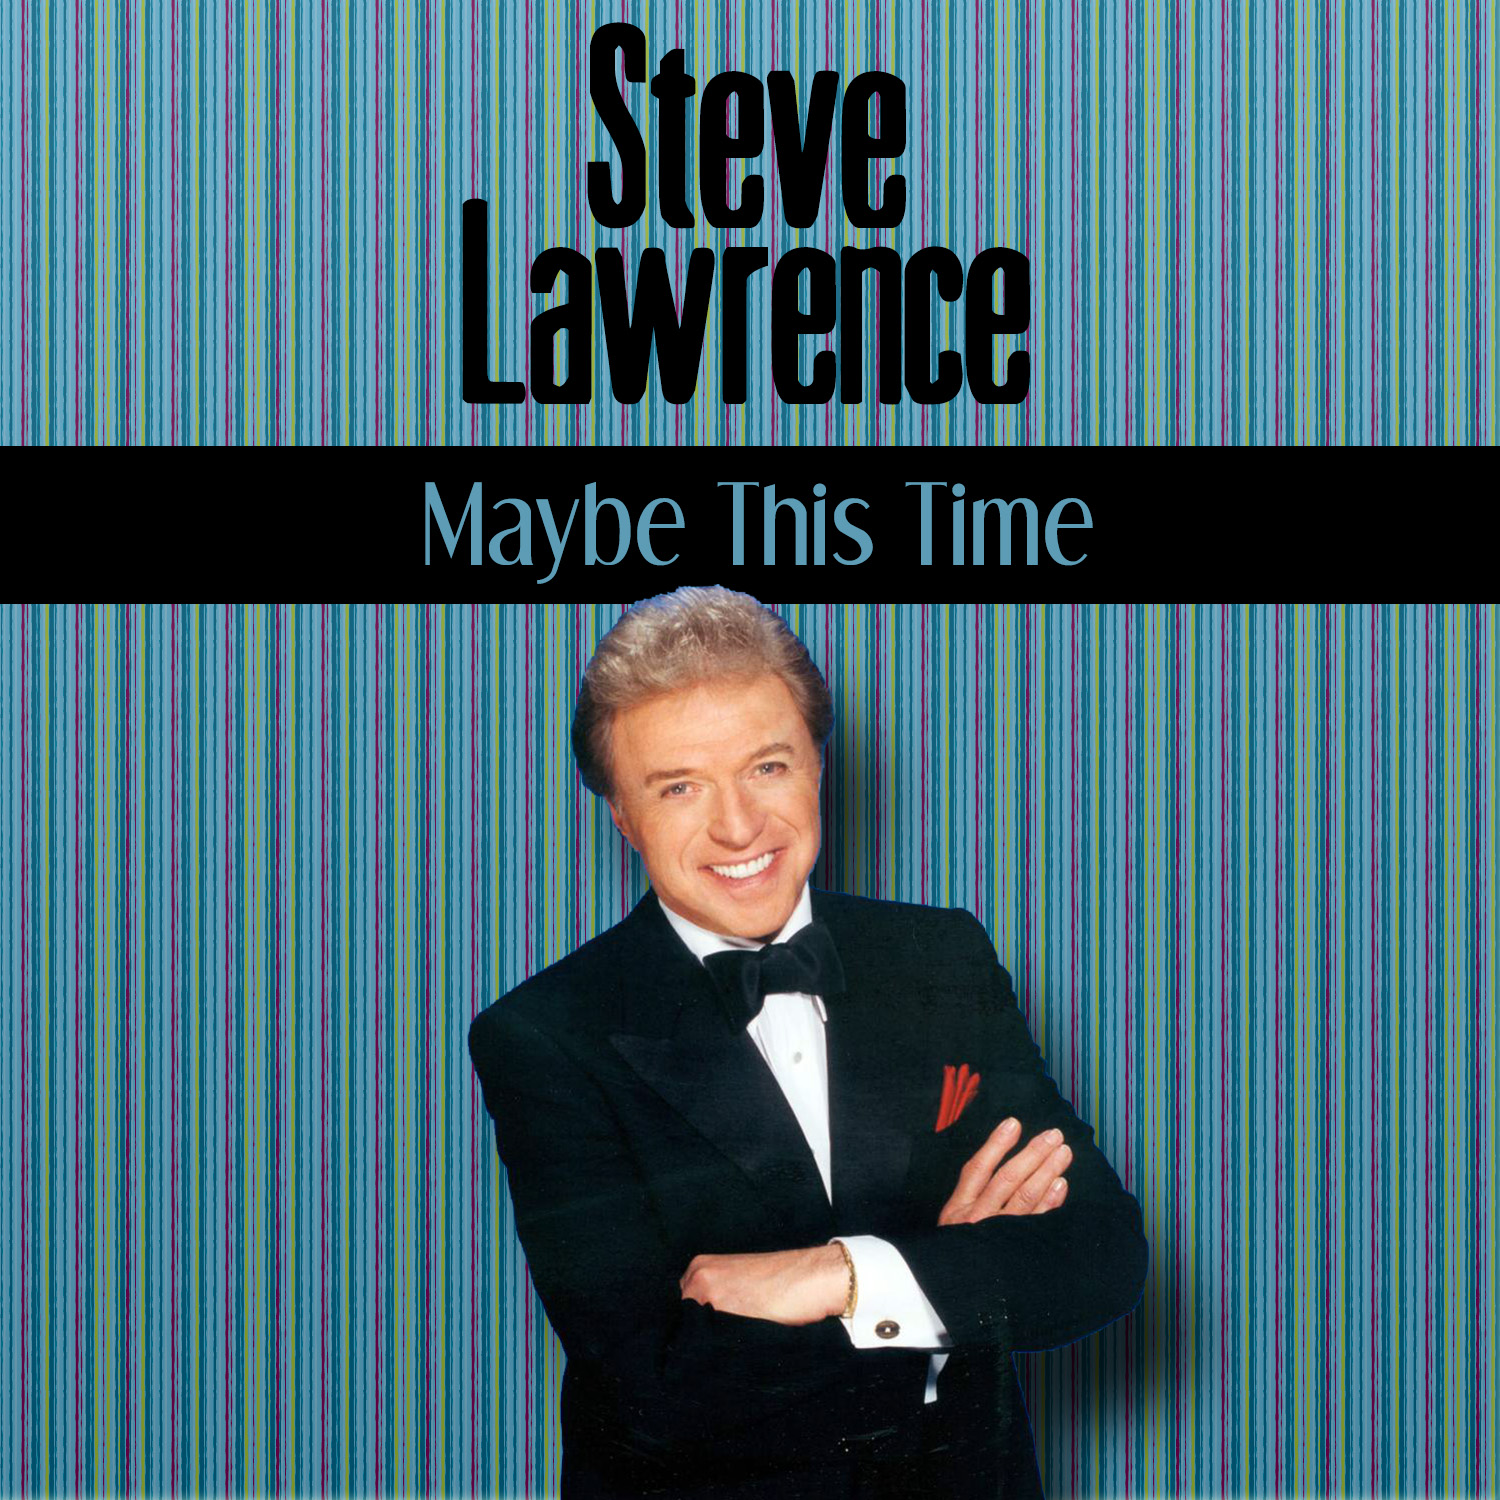 Maybe This Time by Steve Lawrence